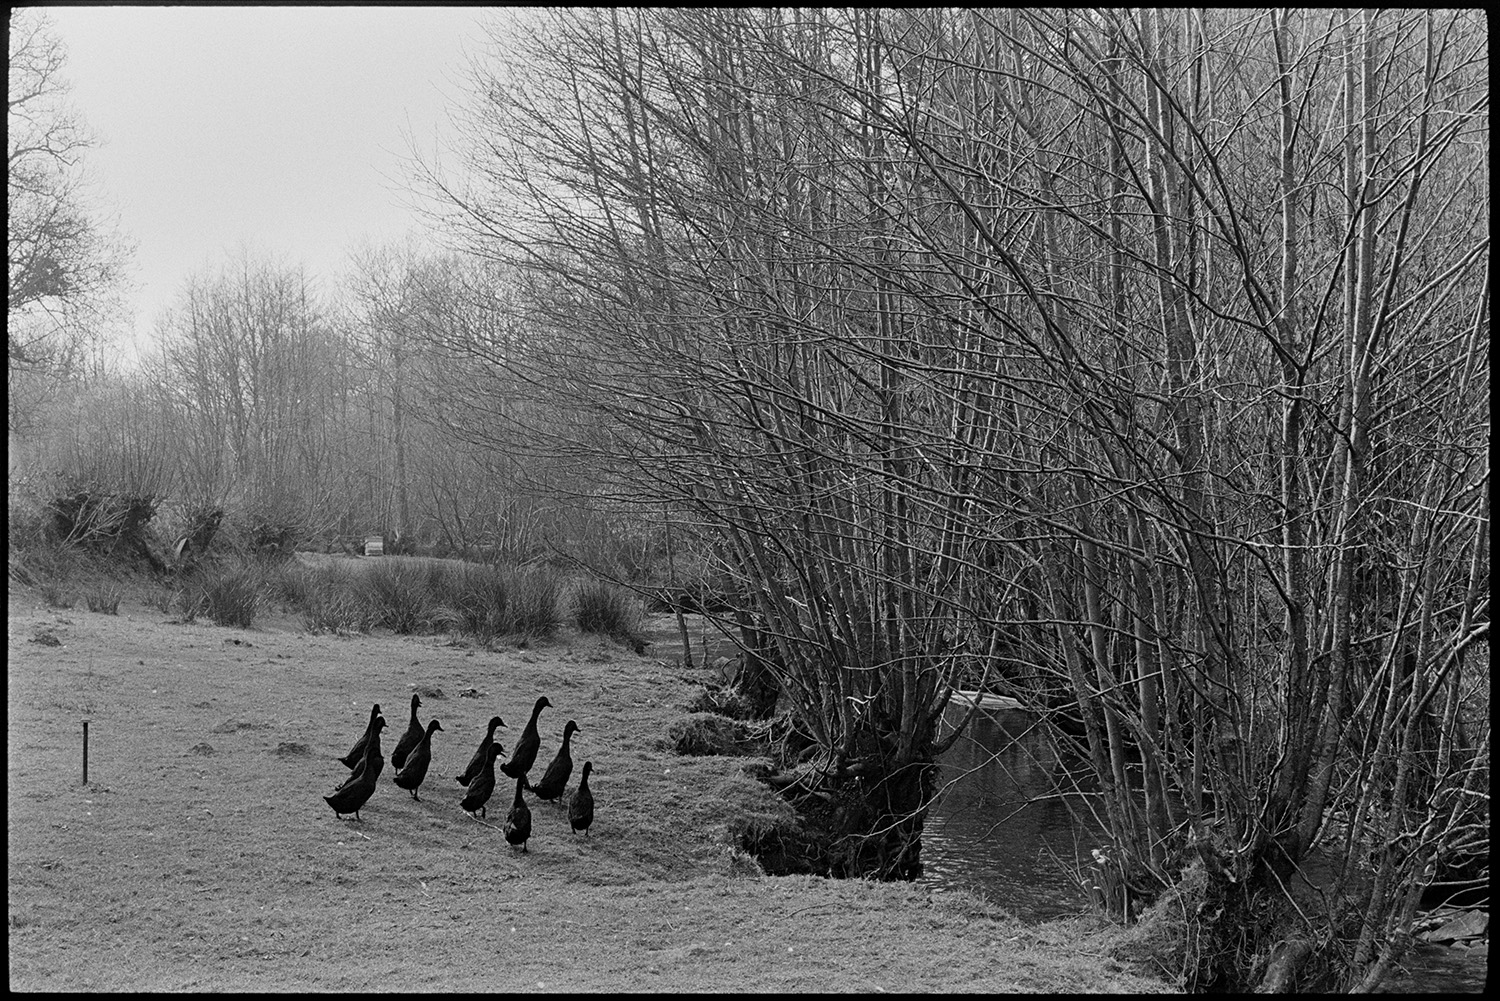 Ducks beside stream. 
[Indian Runner ducks beside a stream lined with trees at Millhams, Dolton.]